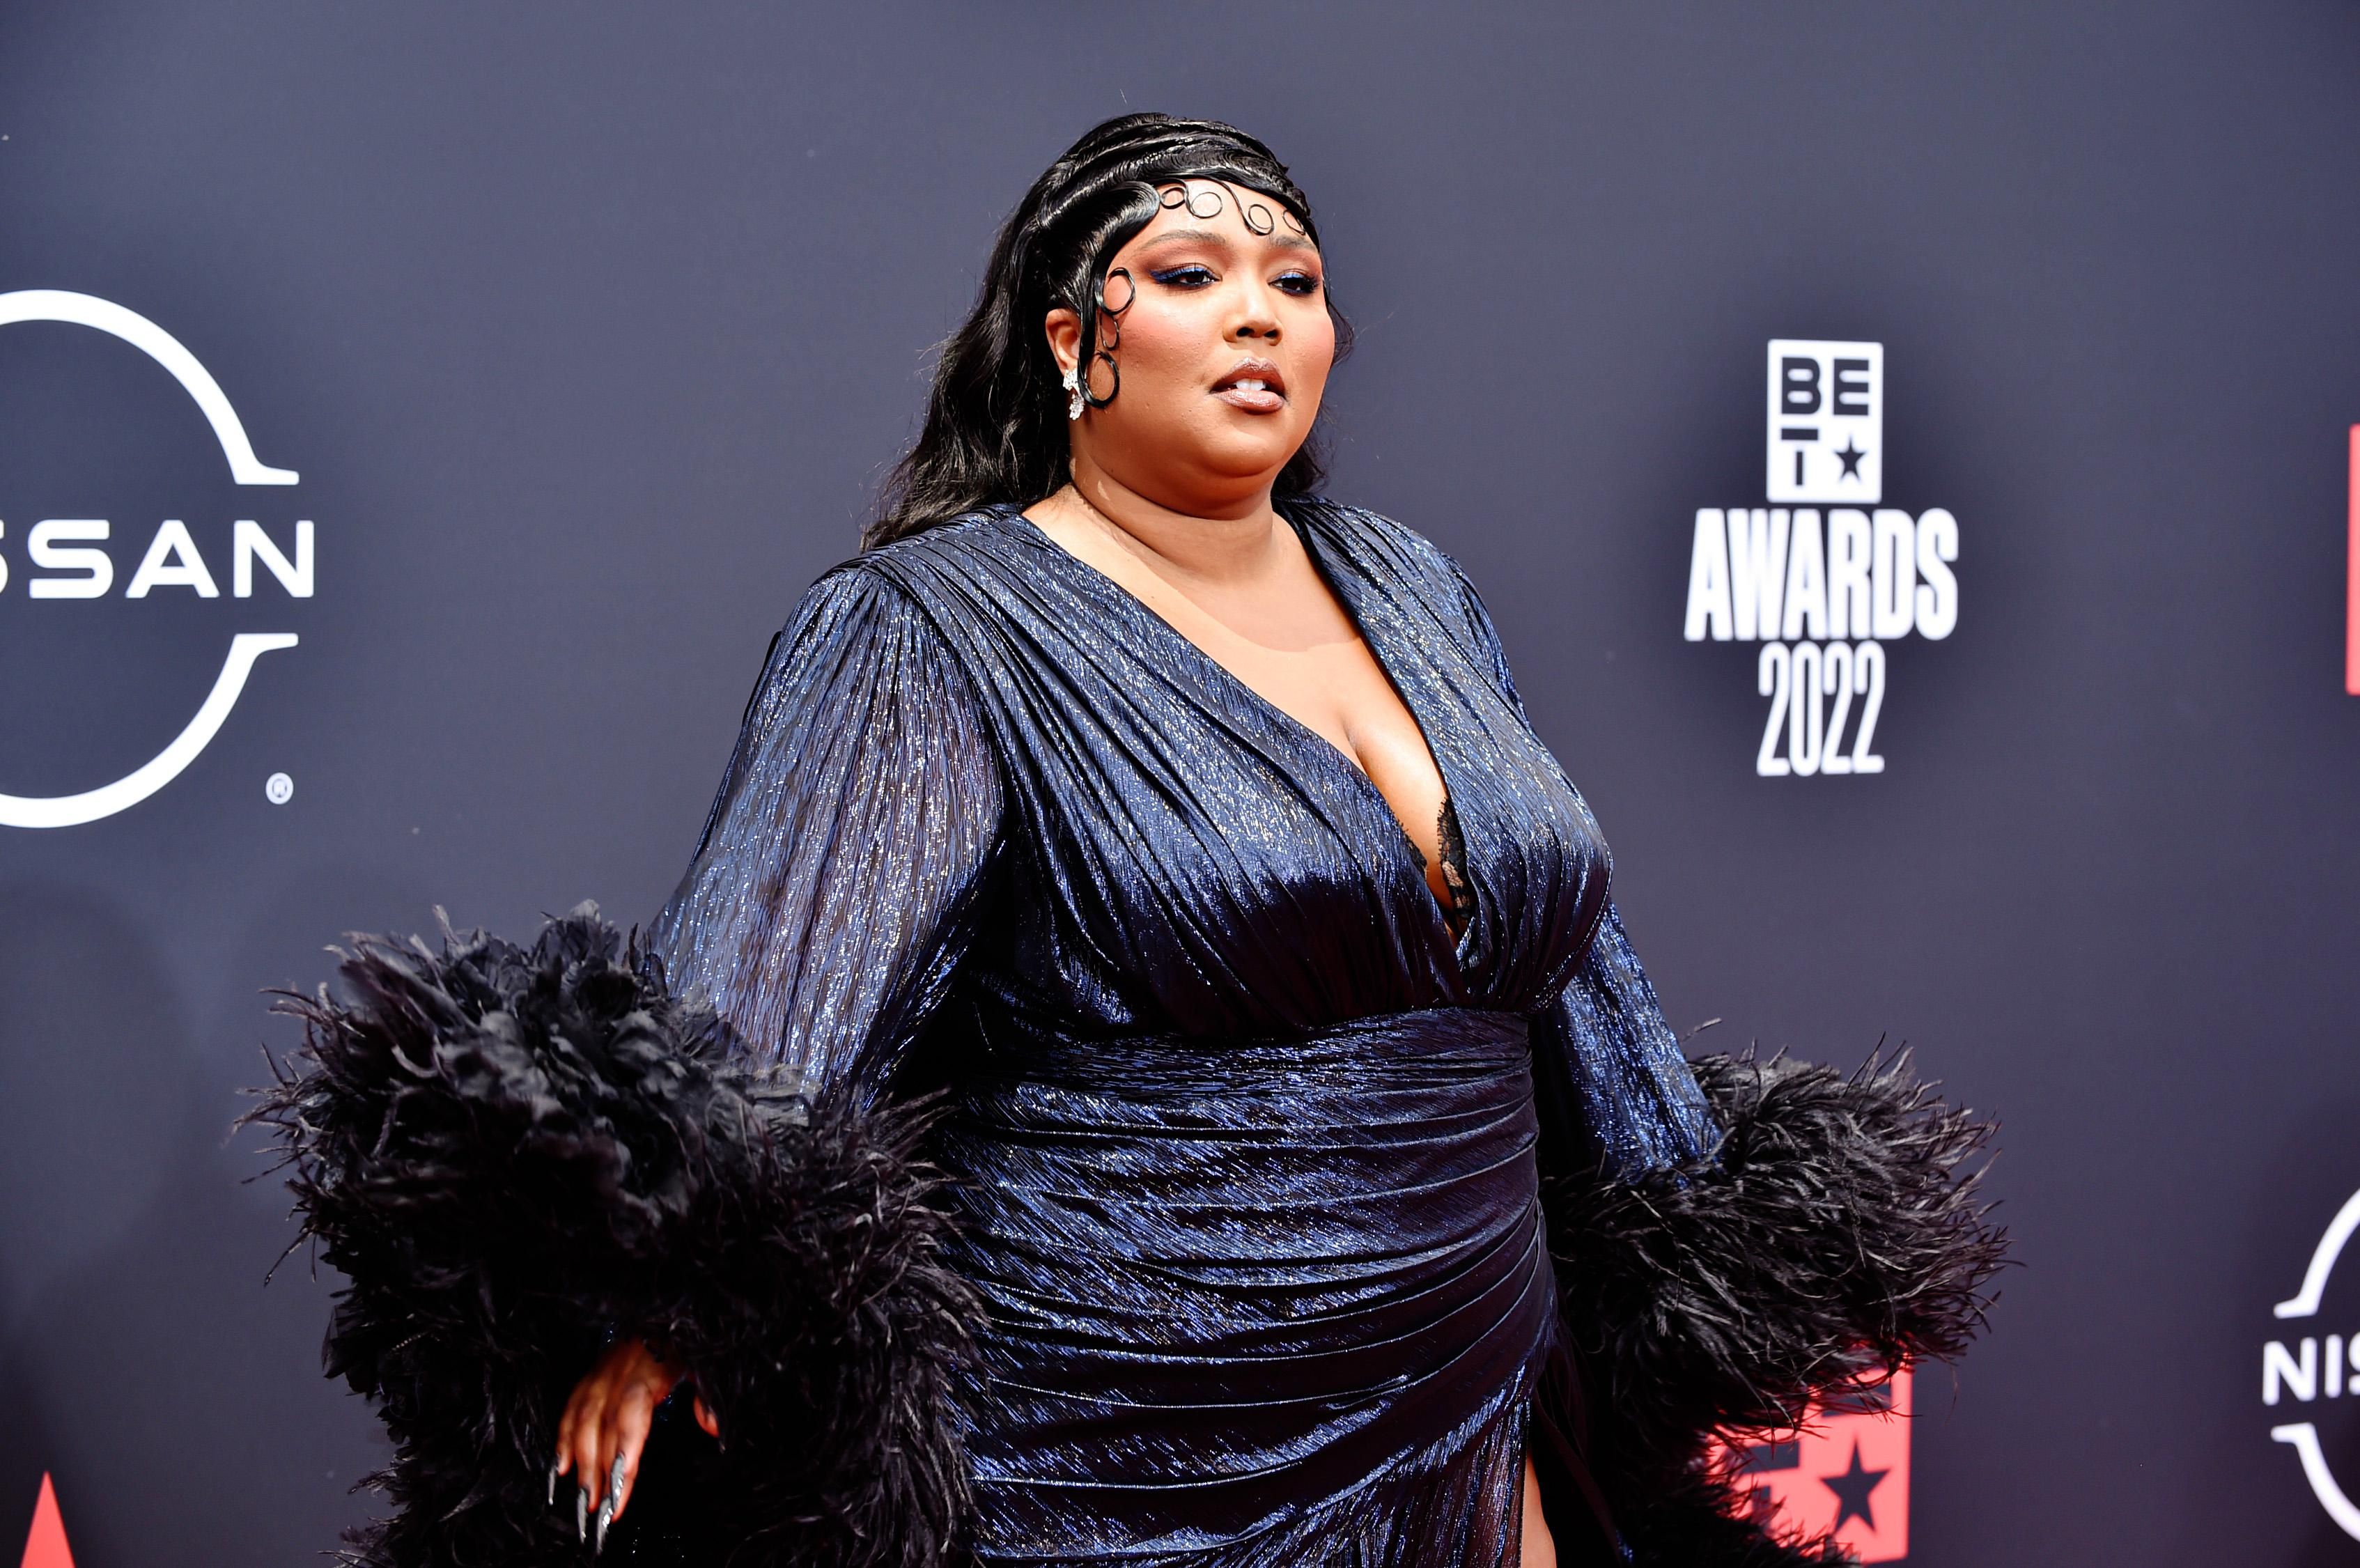 Lizzo Opens Up About Her Non-Traditional Relationship: 'The Love